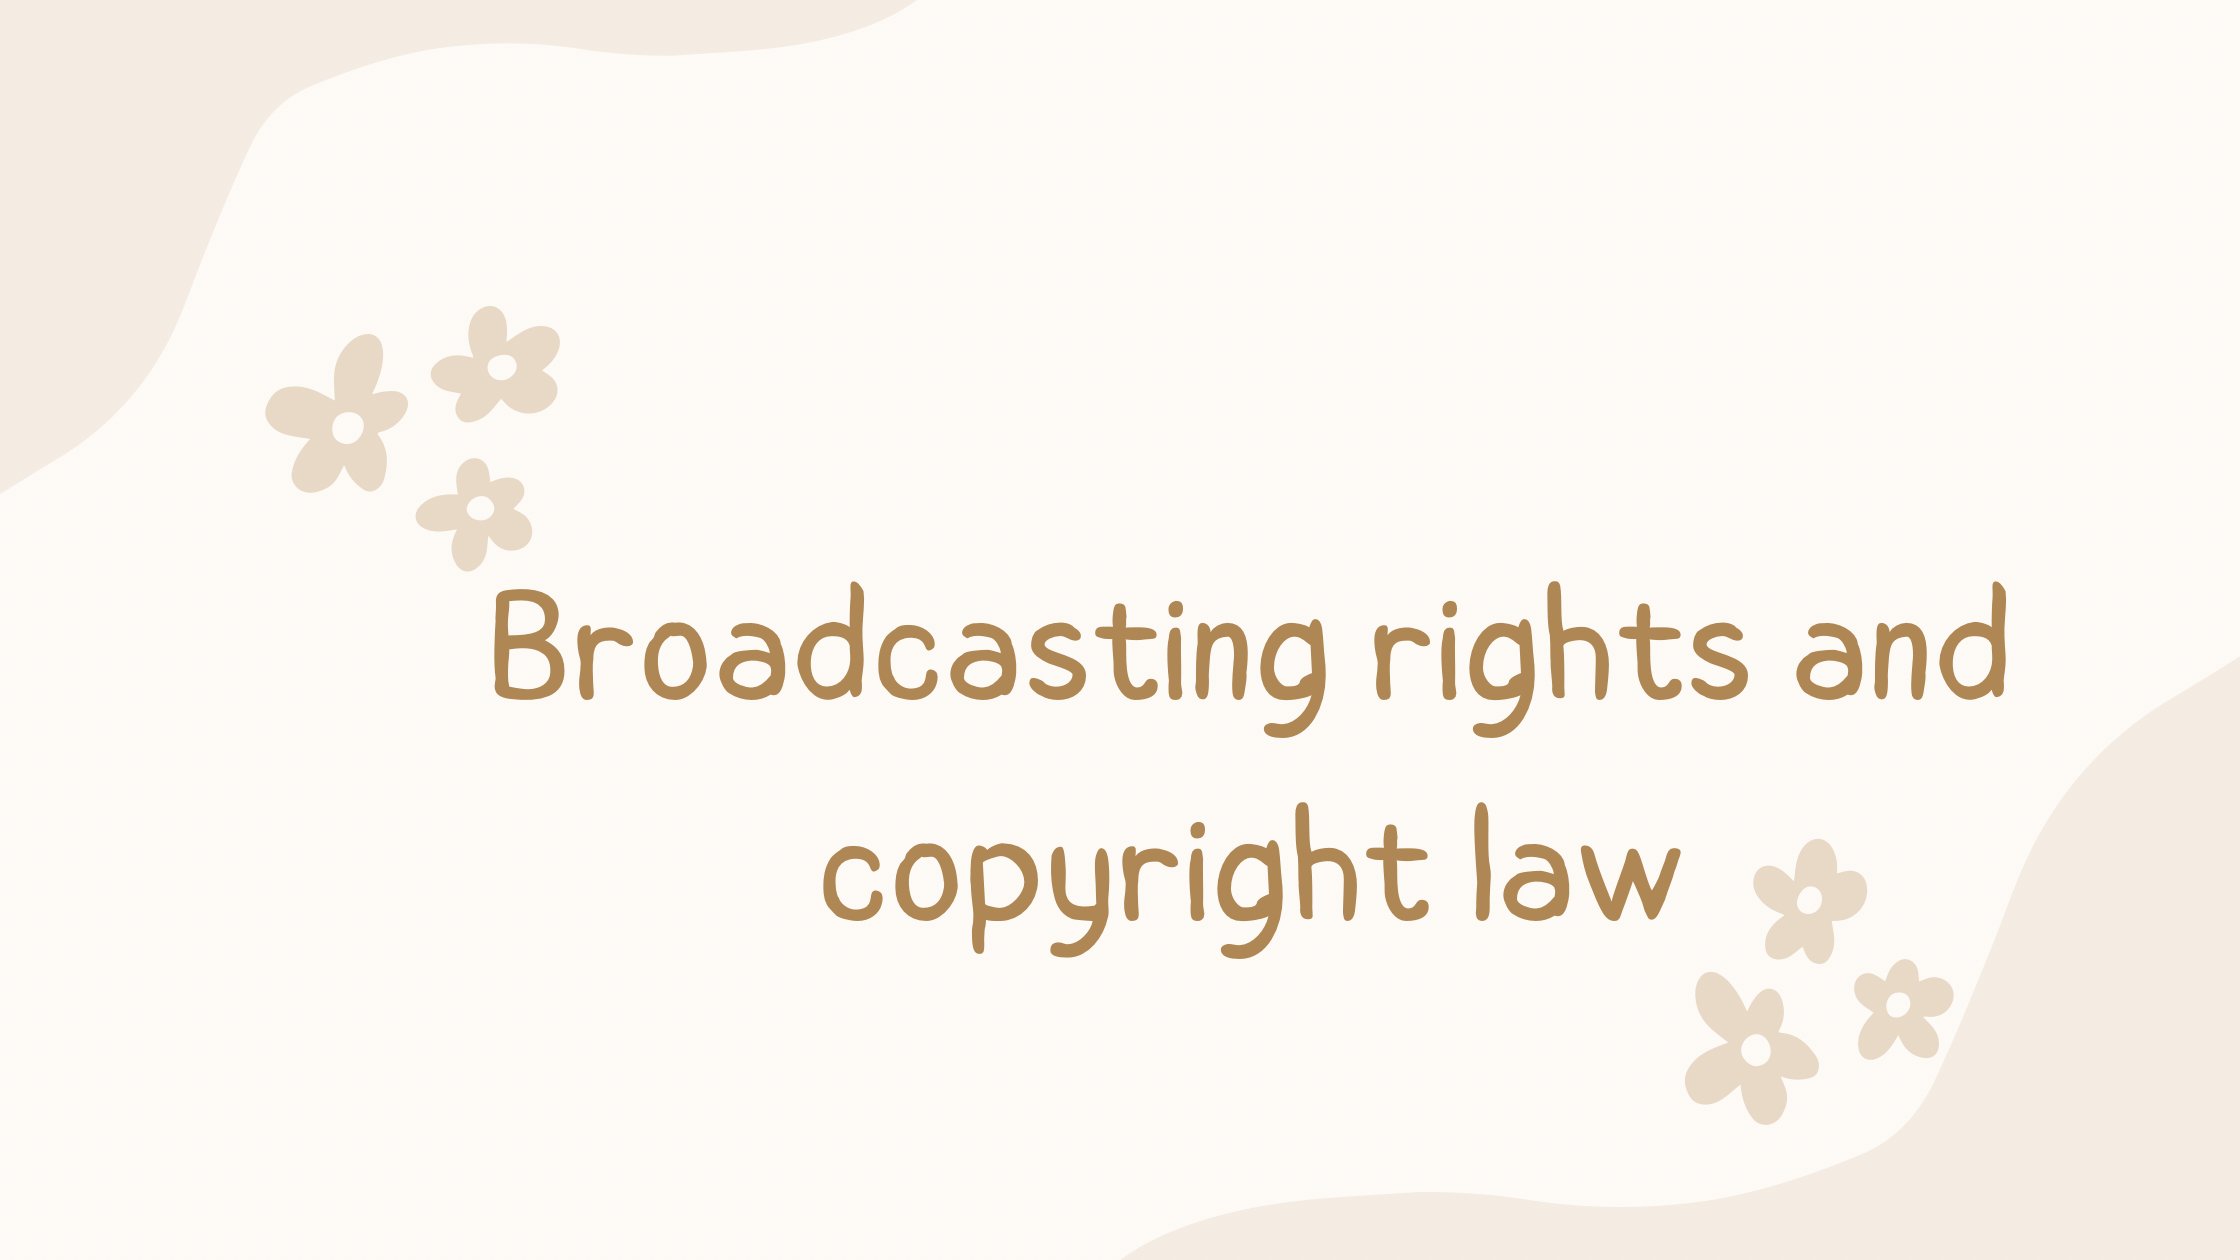 Broadcasting rights and copyright law.